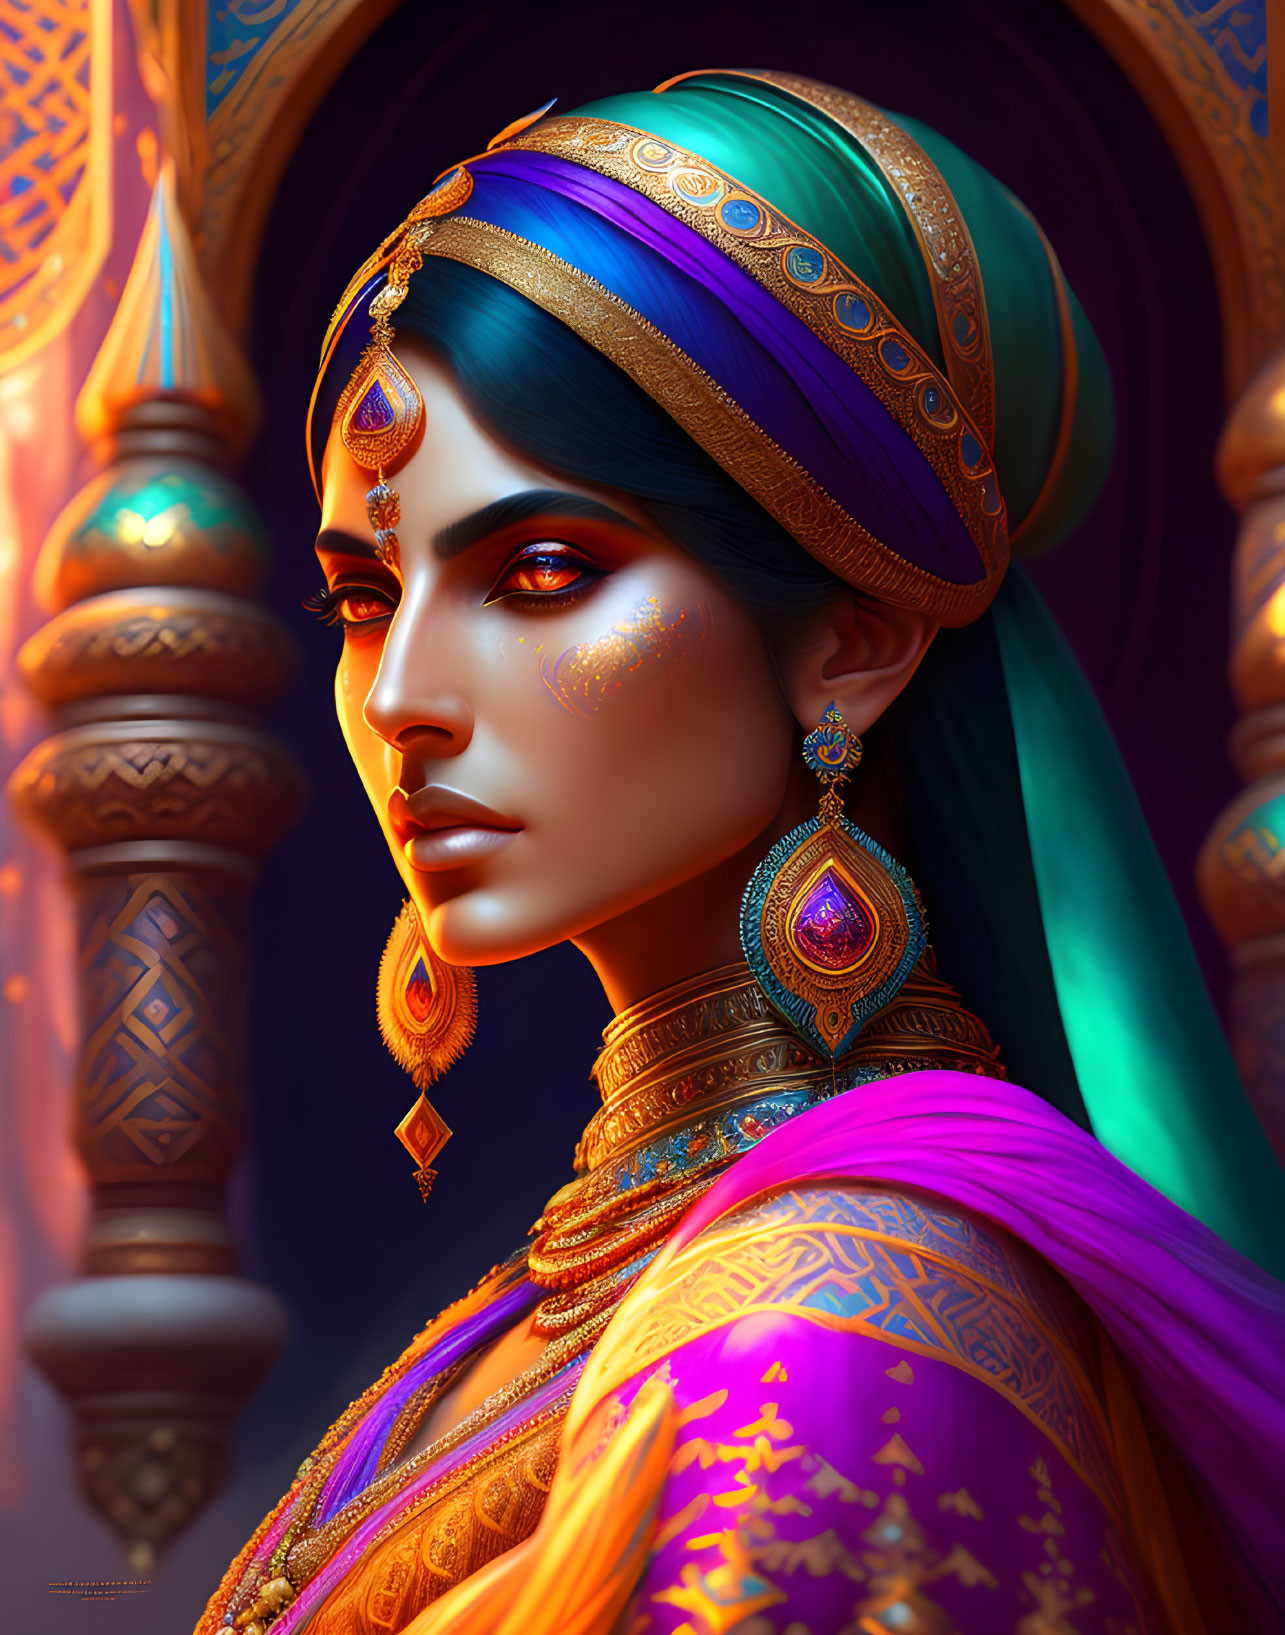 Illustrated woman in traditional attire with intricate jewelry and headpiece against ornate background